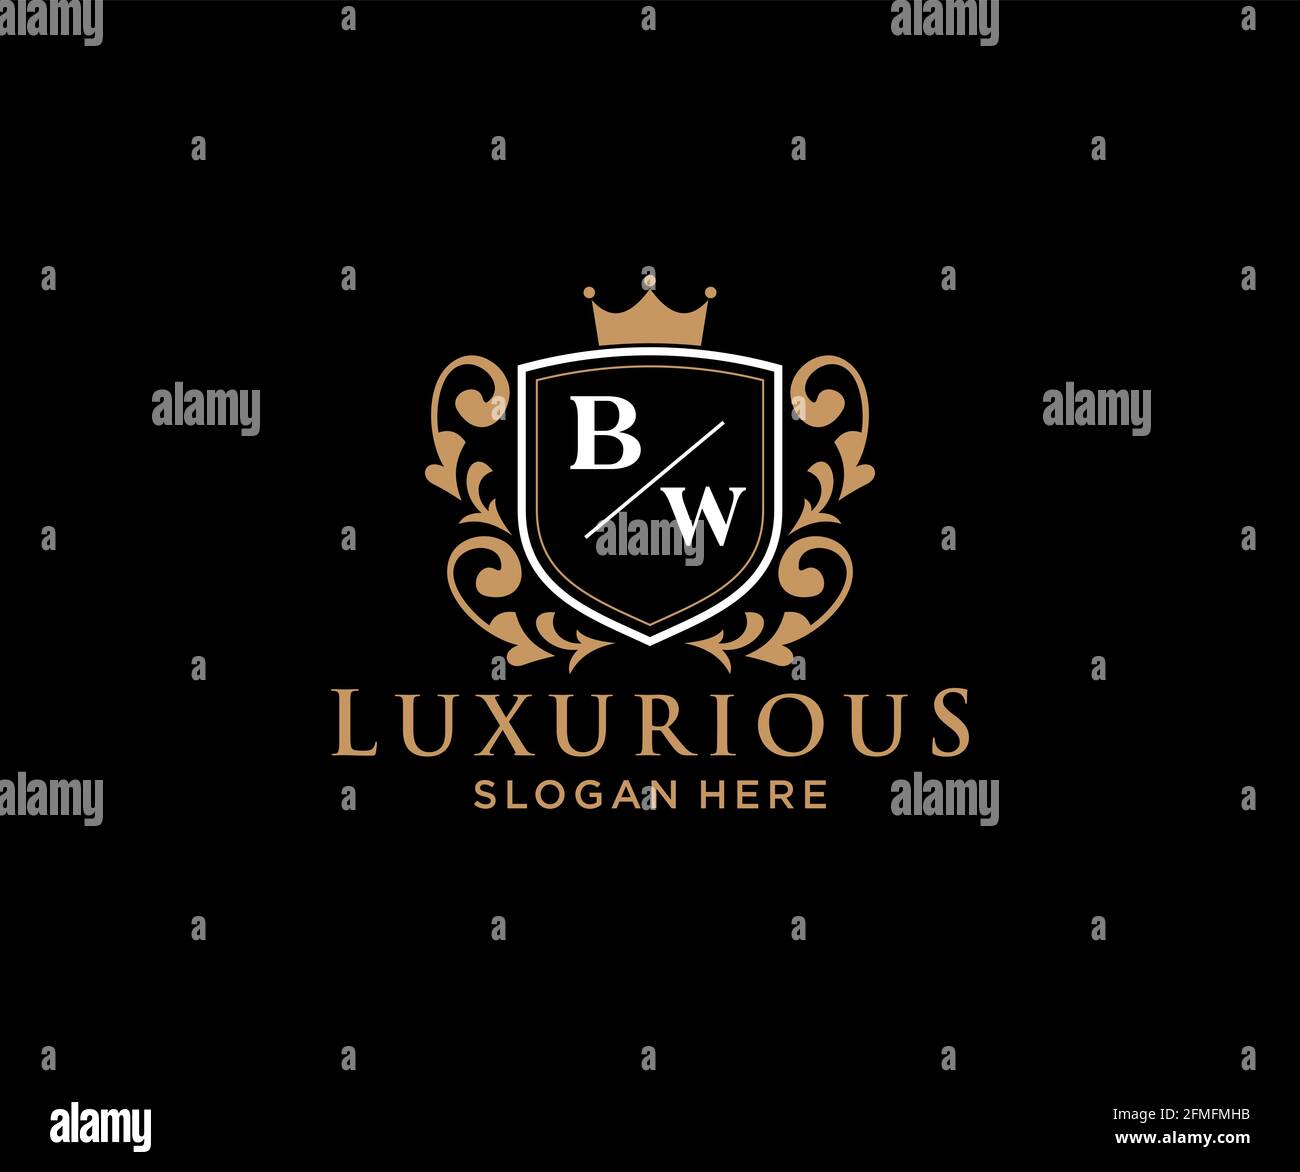 BW Letter Royal Luxury Logo template in vector art for Restaurant, Royalty, Boutique, Cafe, Hotel, Heraldic, Jewelry, Fashion and other vector illustr Stock Vector